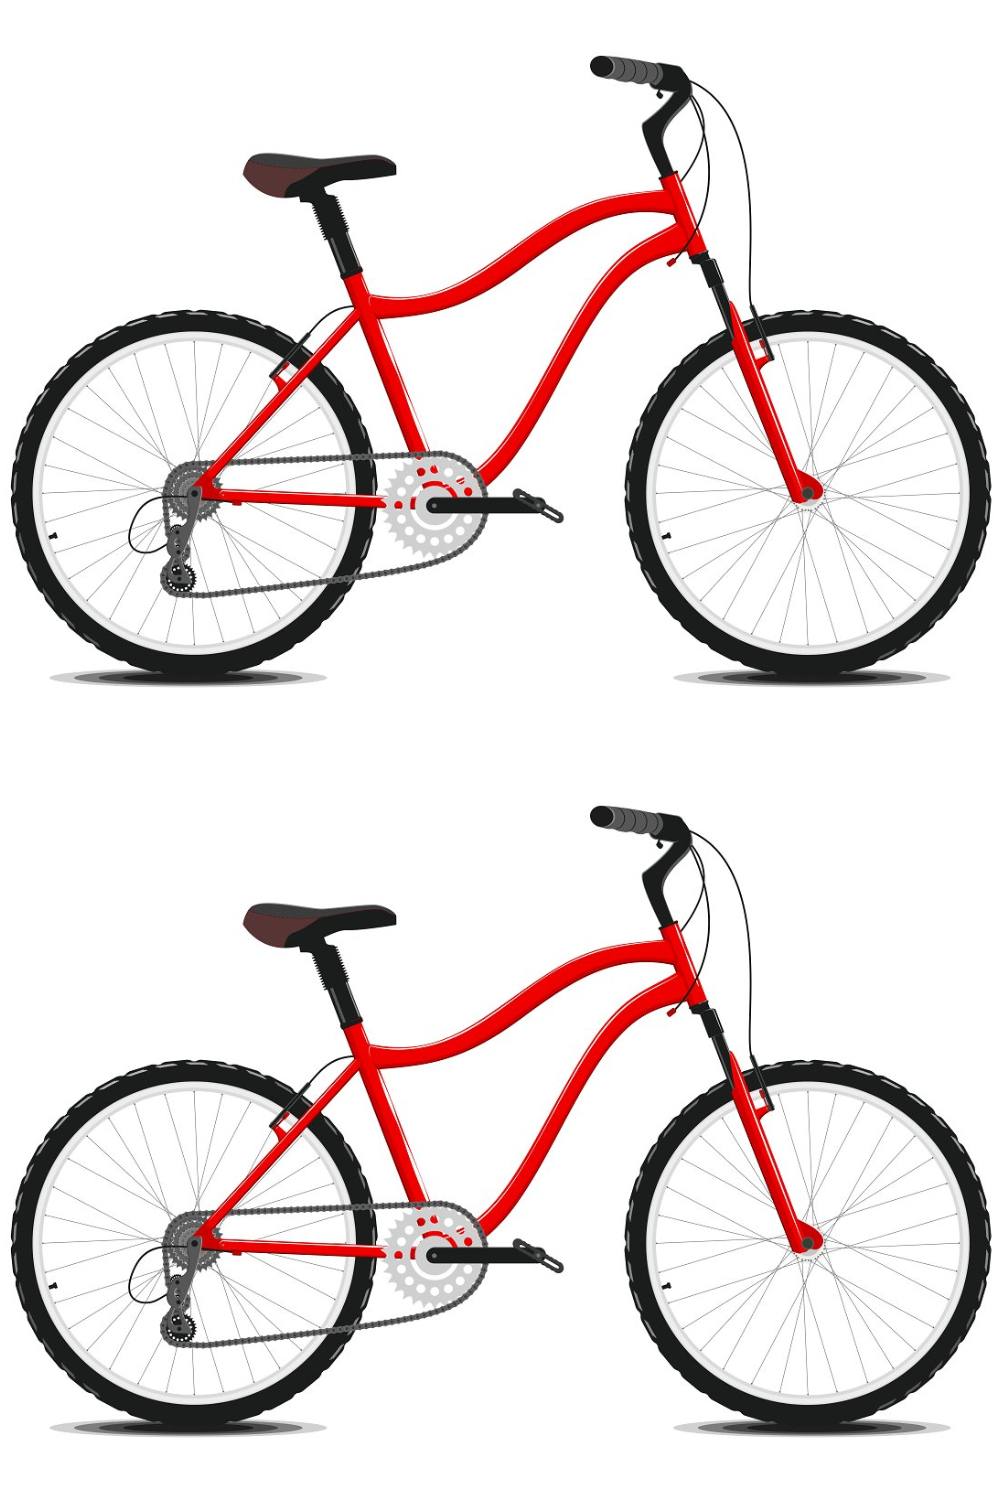 Red Bicycle On A White Background Pinterest Cover.